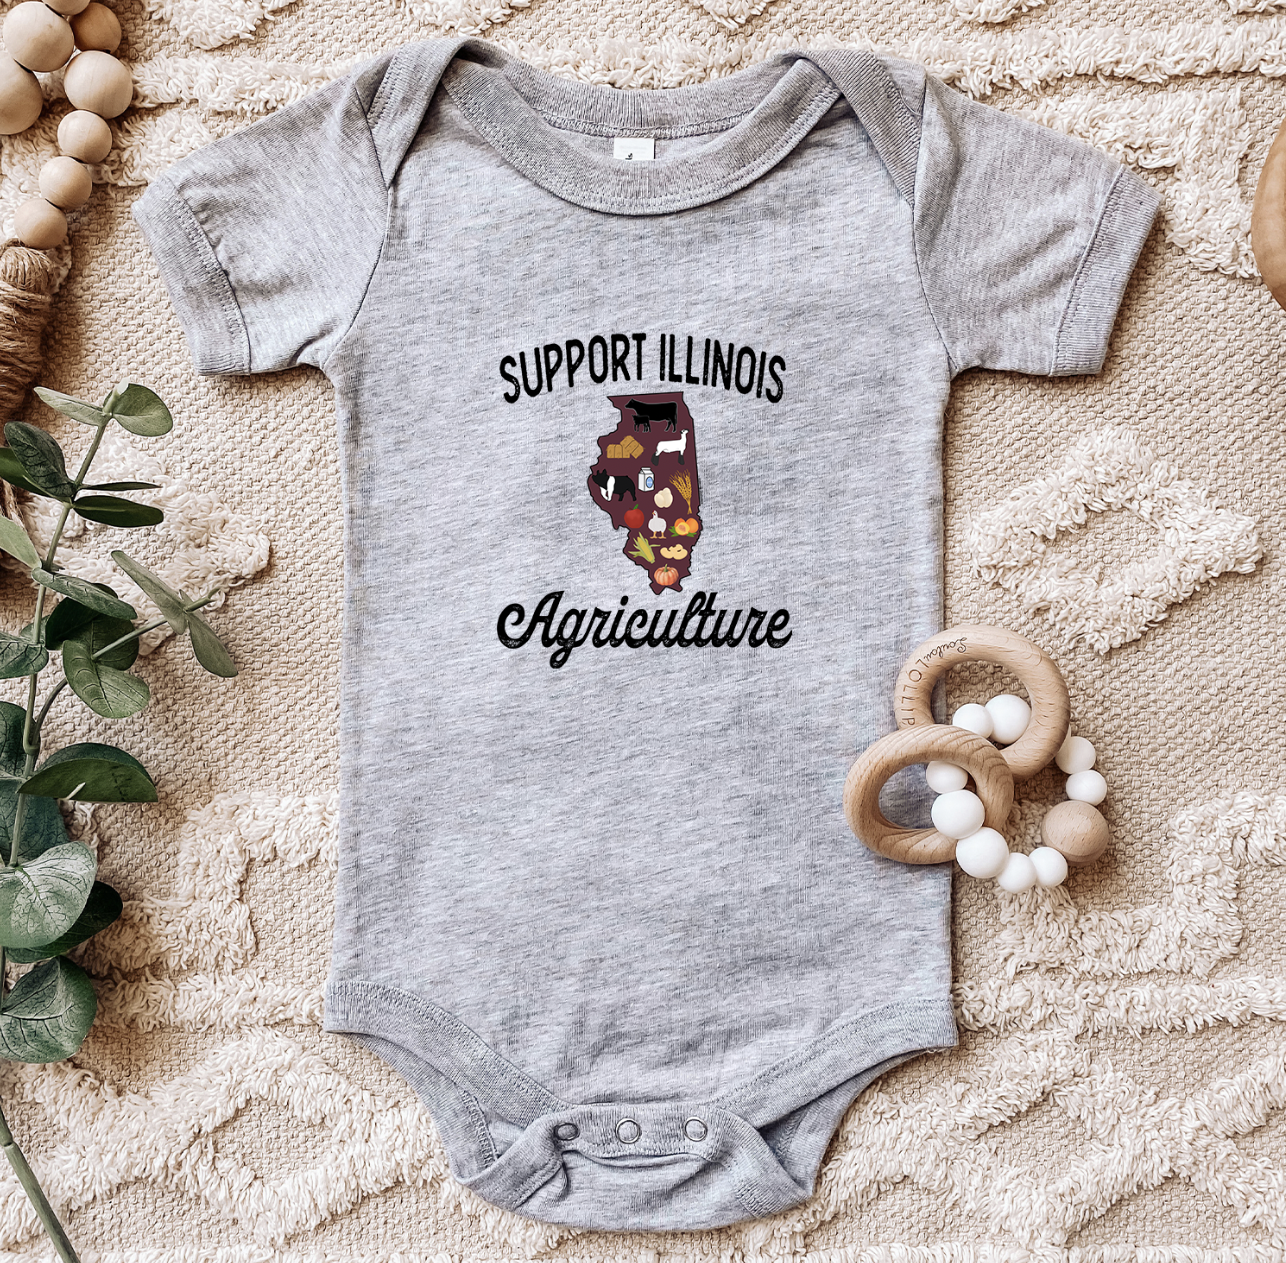 Support Illinois Agriculture One Piece/T-Shirt (Newborn - Youth XL) - Multiple Colors!